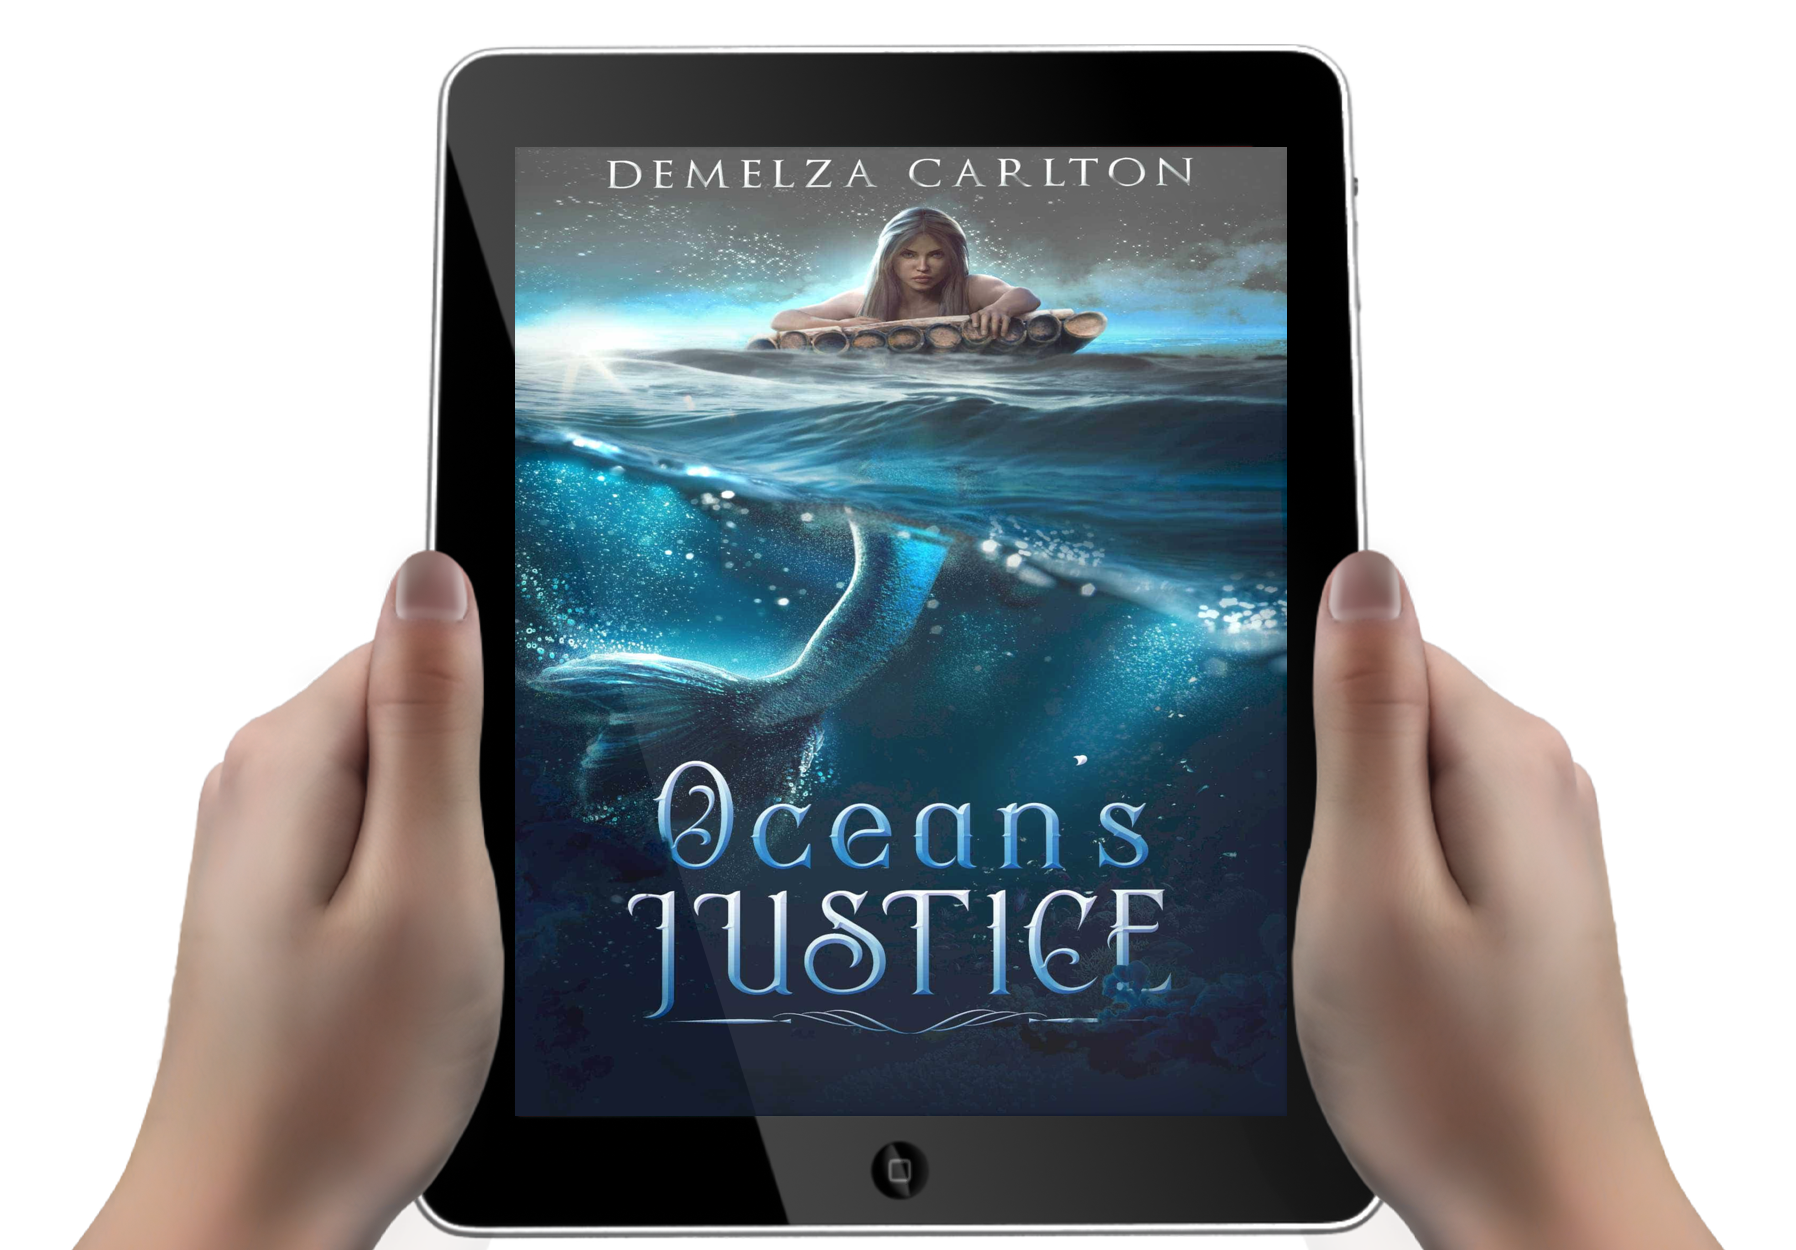 Ocean's Justice Book 1 in the Siren of War series by USA Today Bestselling Author Demelza Carlton ebook